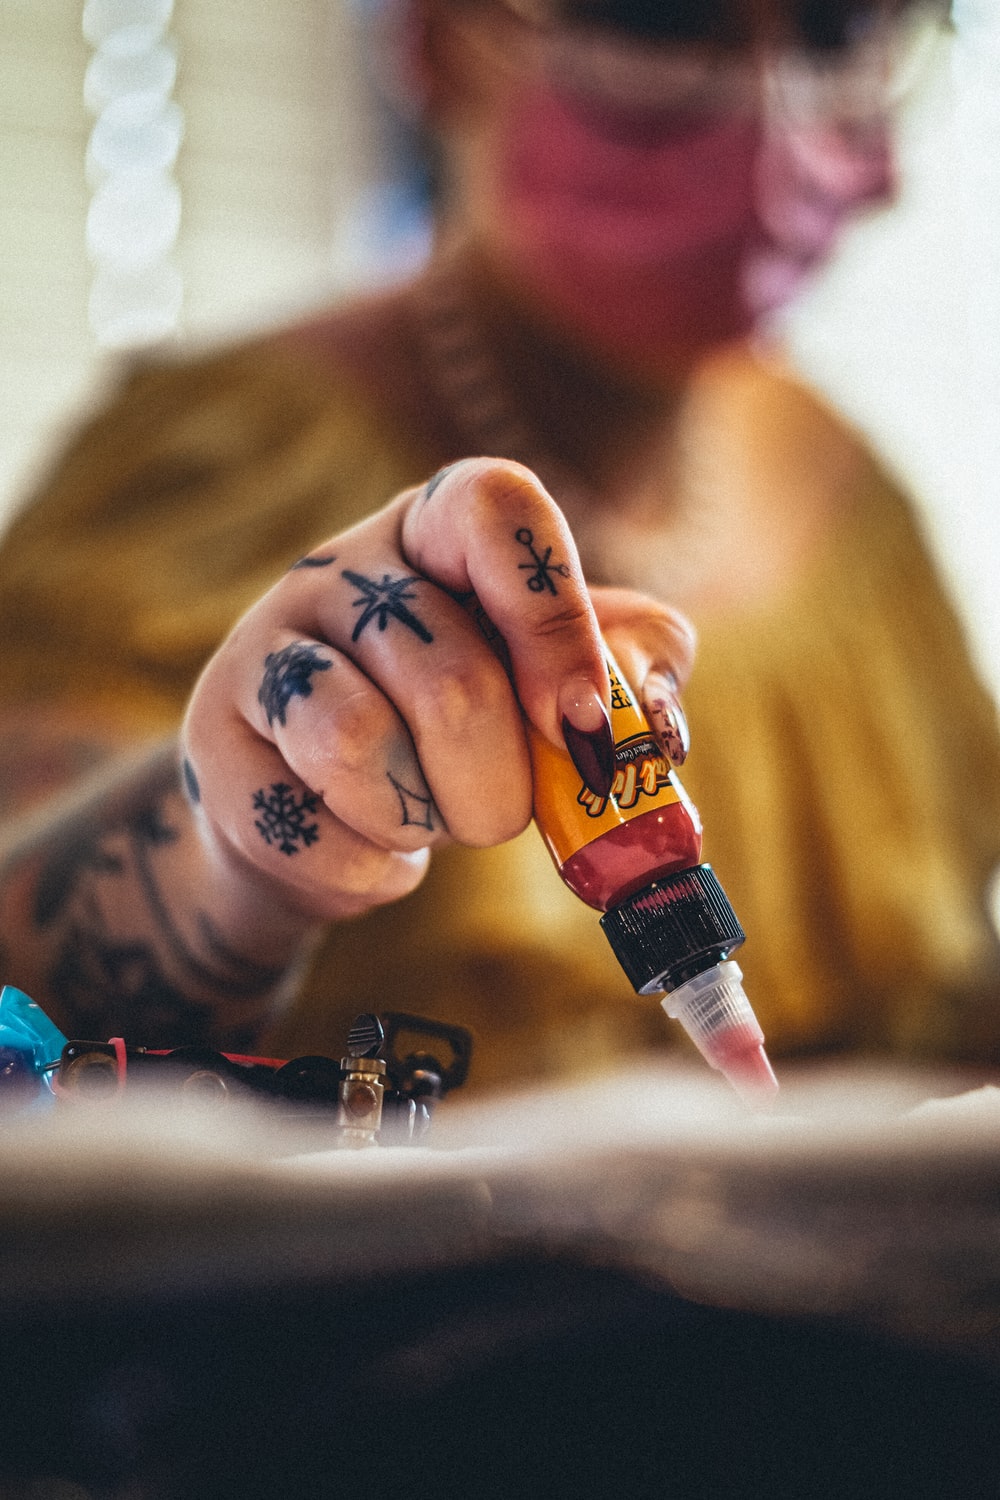 Tattoo Artist Picture. Download Free Image